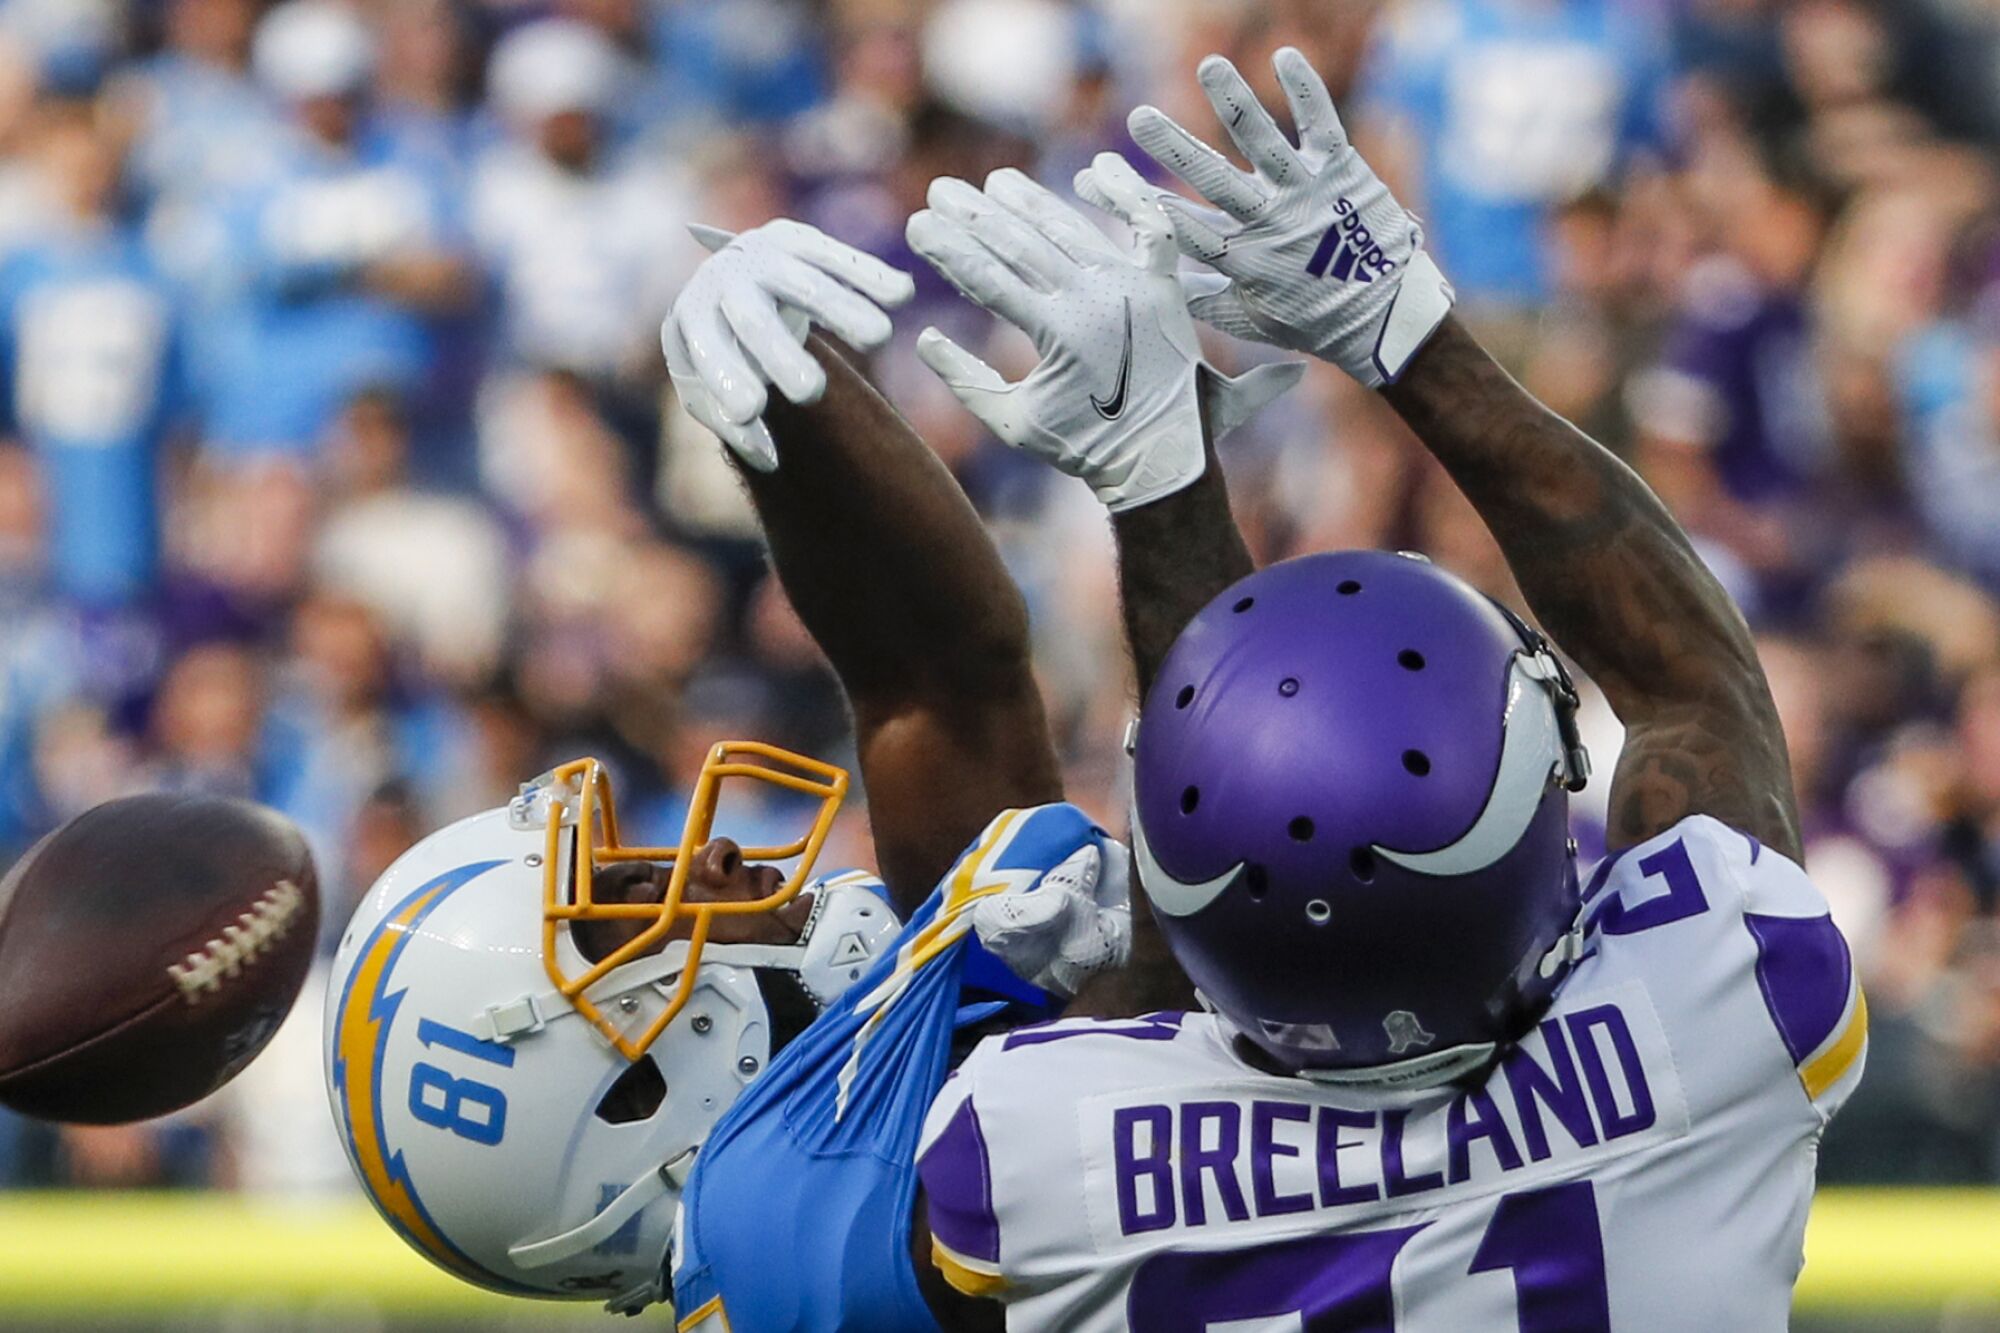 Vikings cornerback Bashaud Breeland interferes on a pass to Chargers wide receiver Mike Williams.